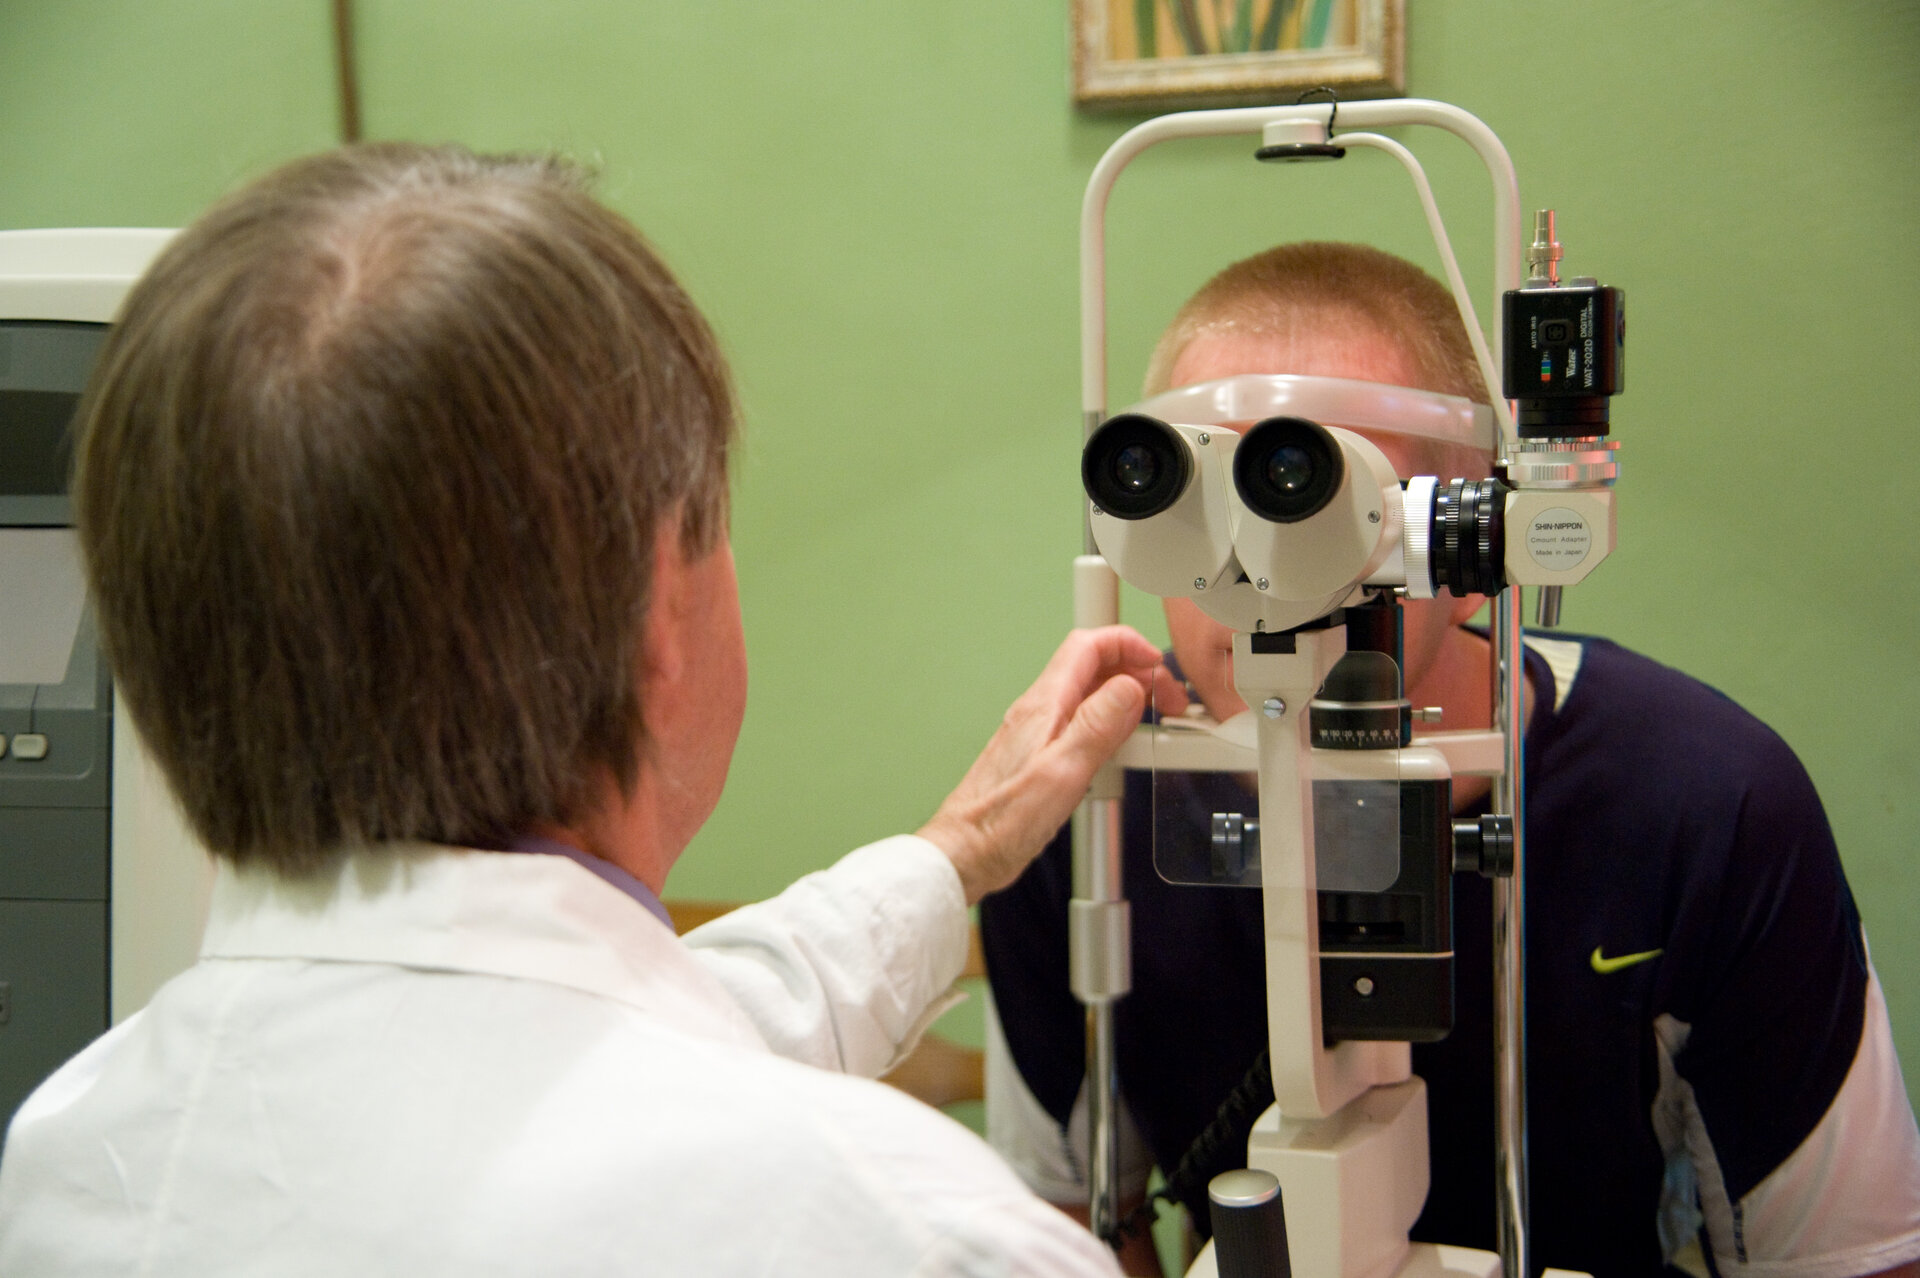 There were also consultations with specialists including an ophthalmologist